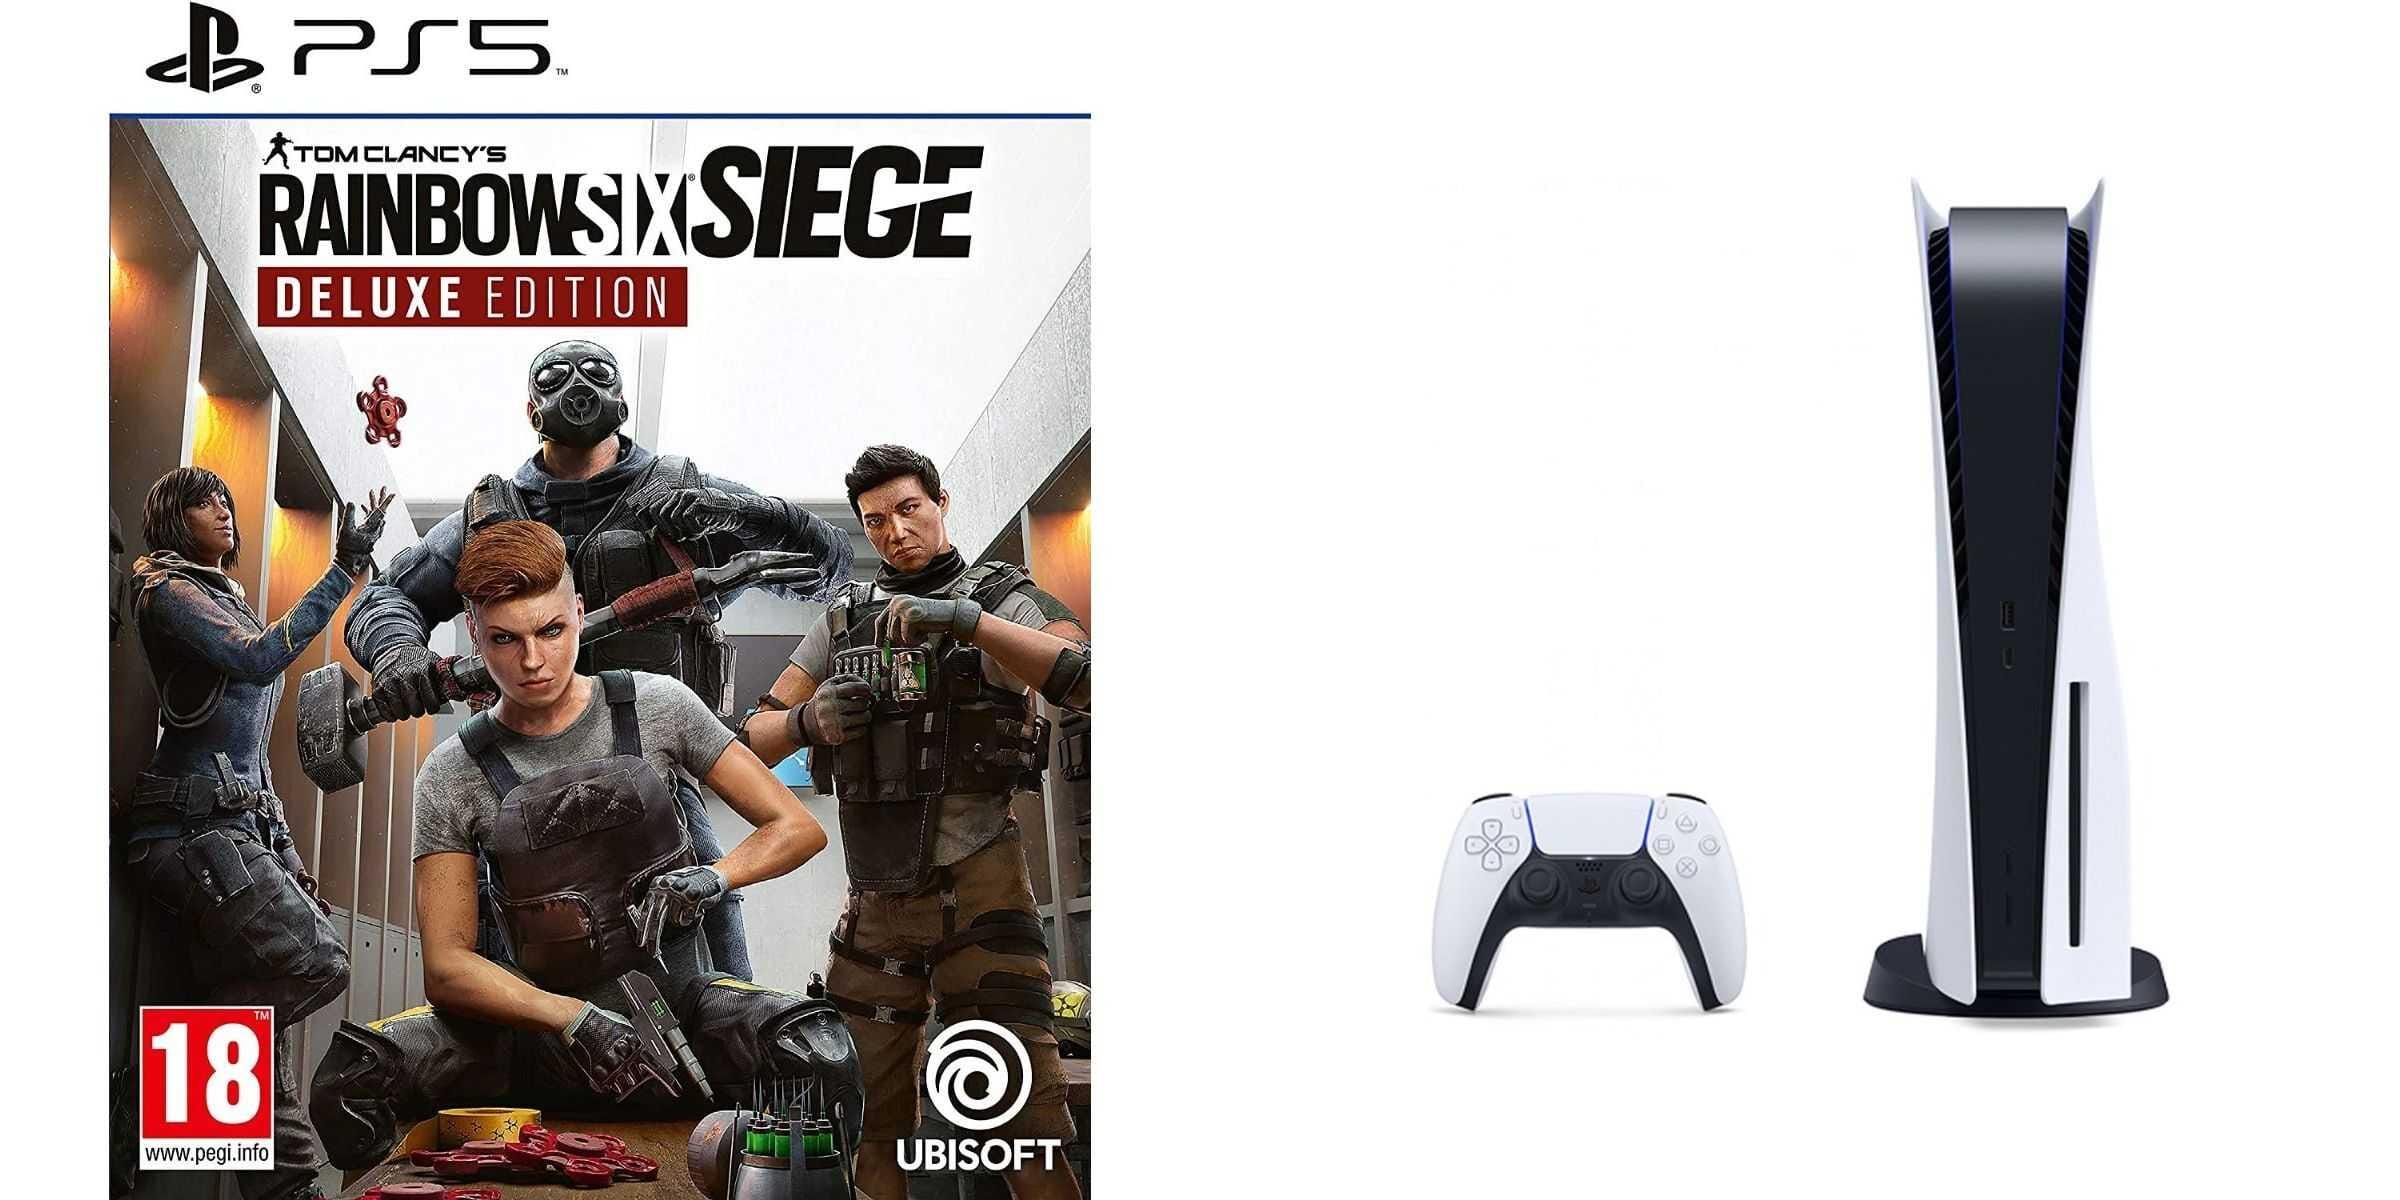 Sony PlayStation 5, 1 Wireless Controller, White - CFI-1016A01 MEE, with Tom Clancy's Rainbow Six Siege, Deluxe Edition for PlayStation5